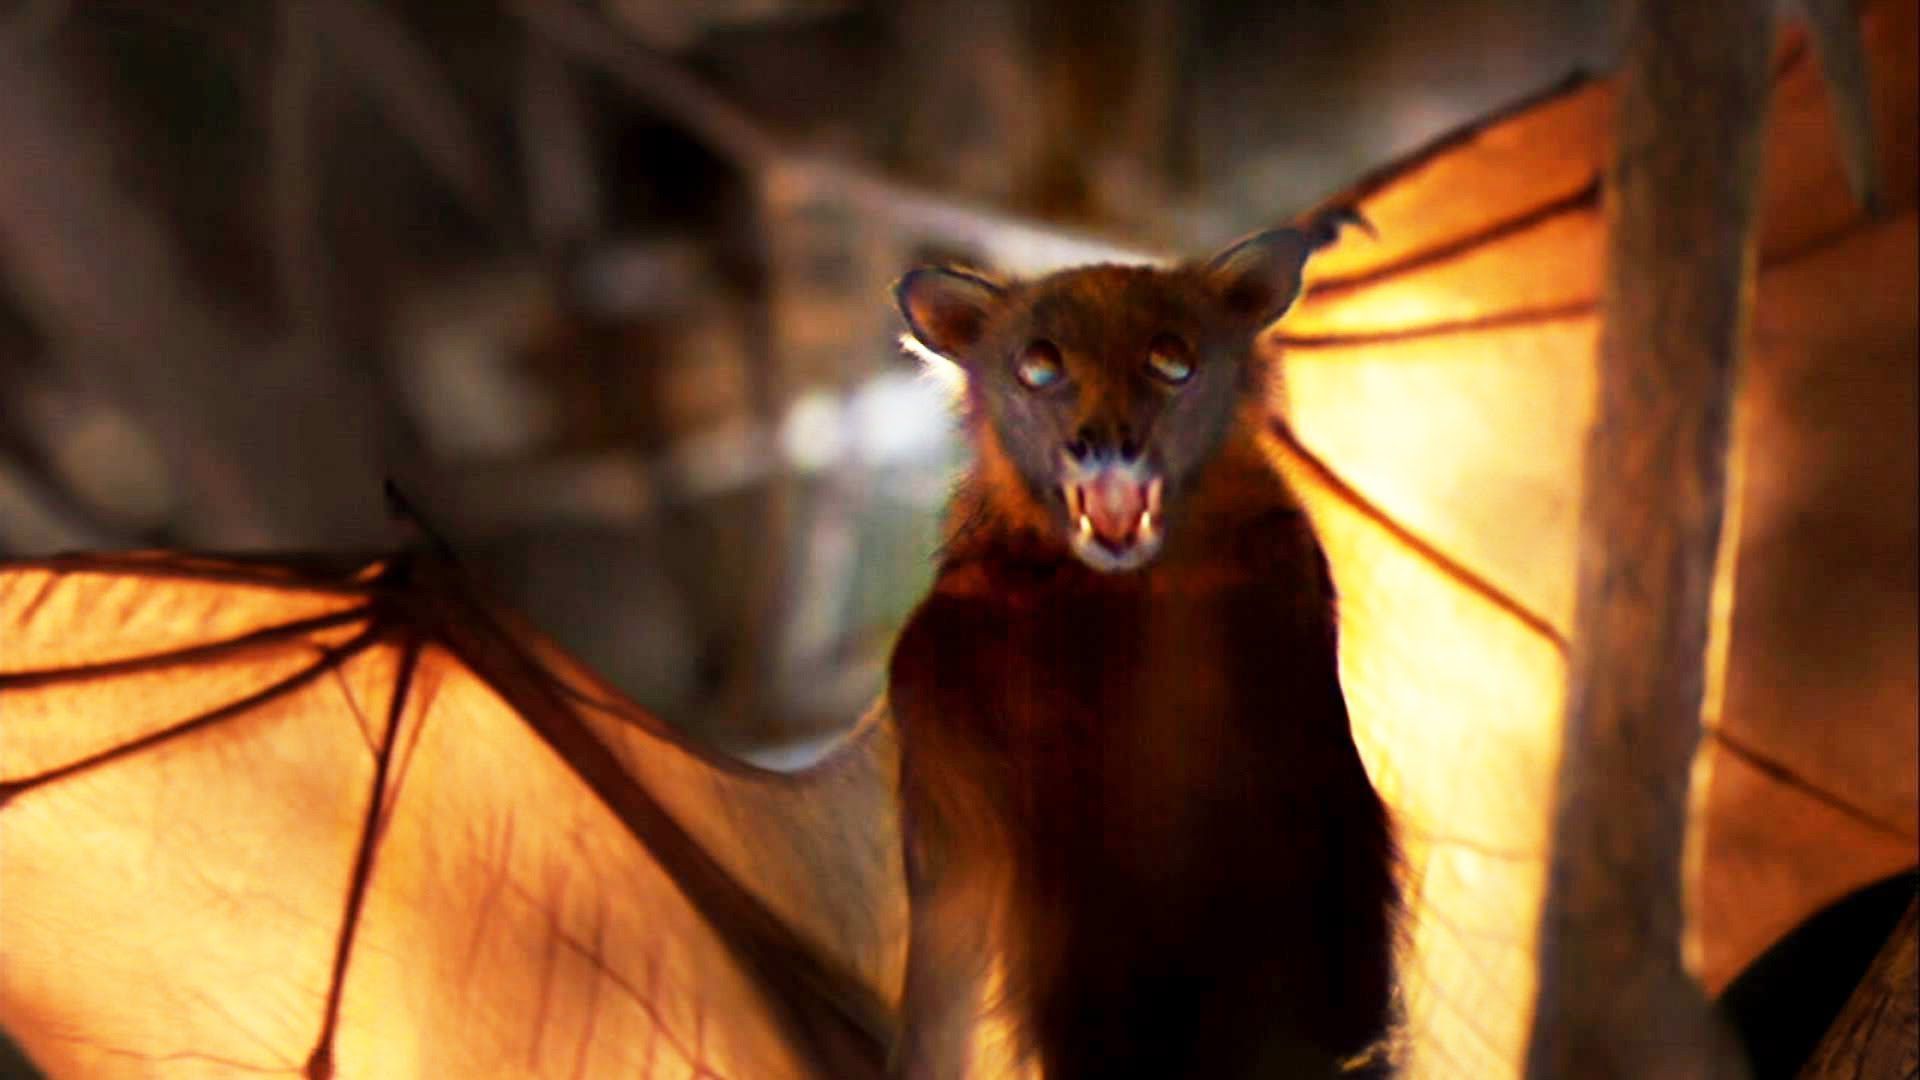 Meet the little red flying fox, a bat with a wingspan of up to three feet. Its wings take a lot of work to maintain